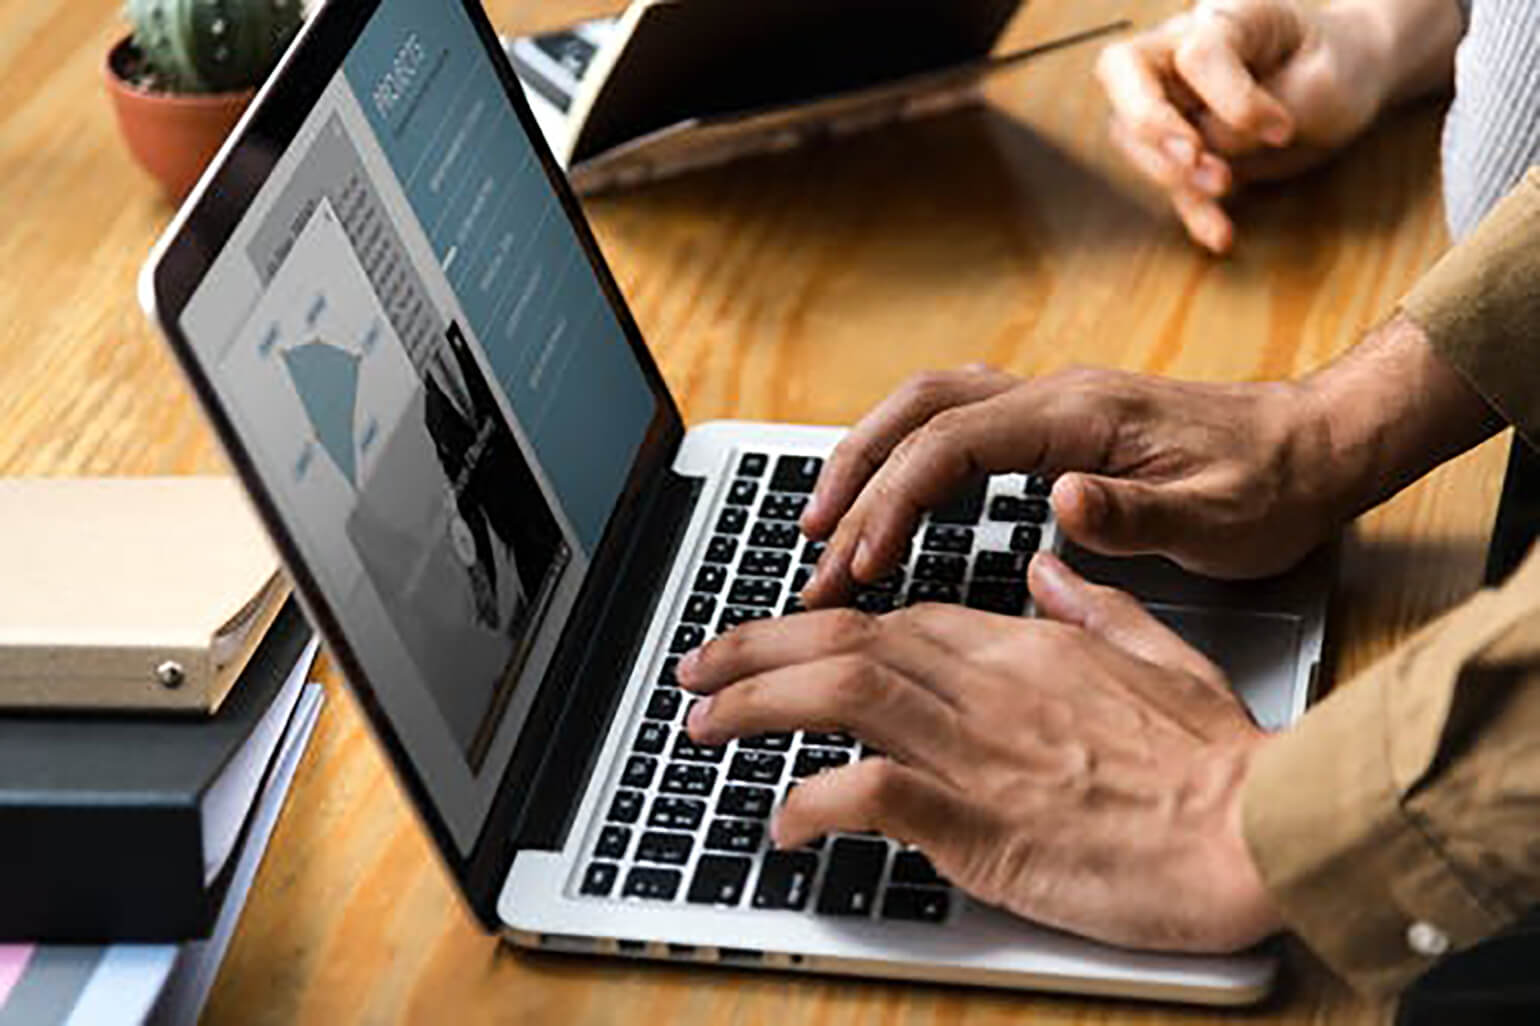 Image of hands typing on an open laptop that is on a wooden table or desk. Nearby are another set of hands leaning on the desk.